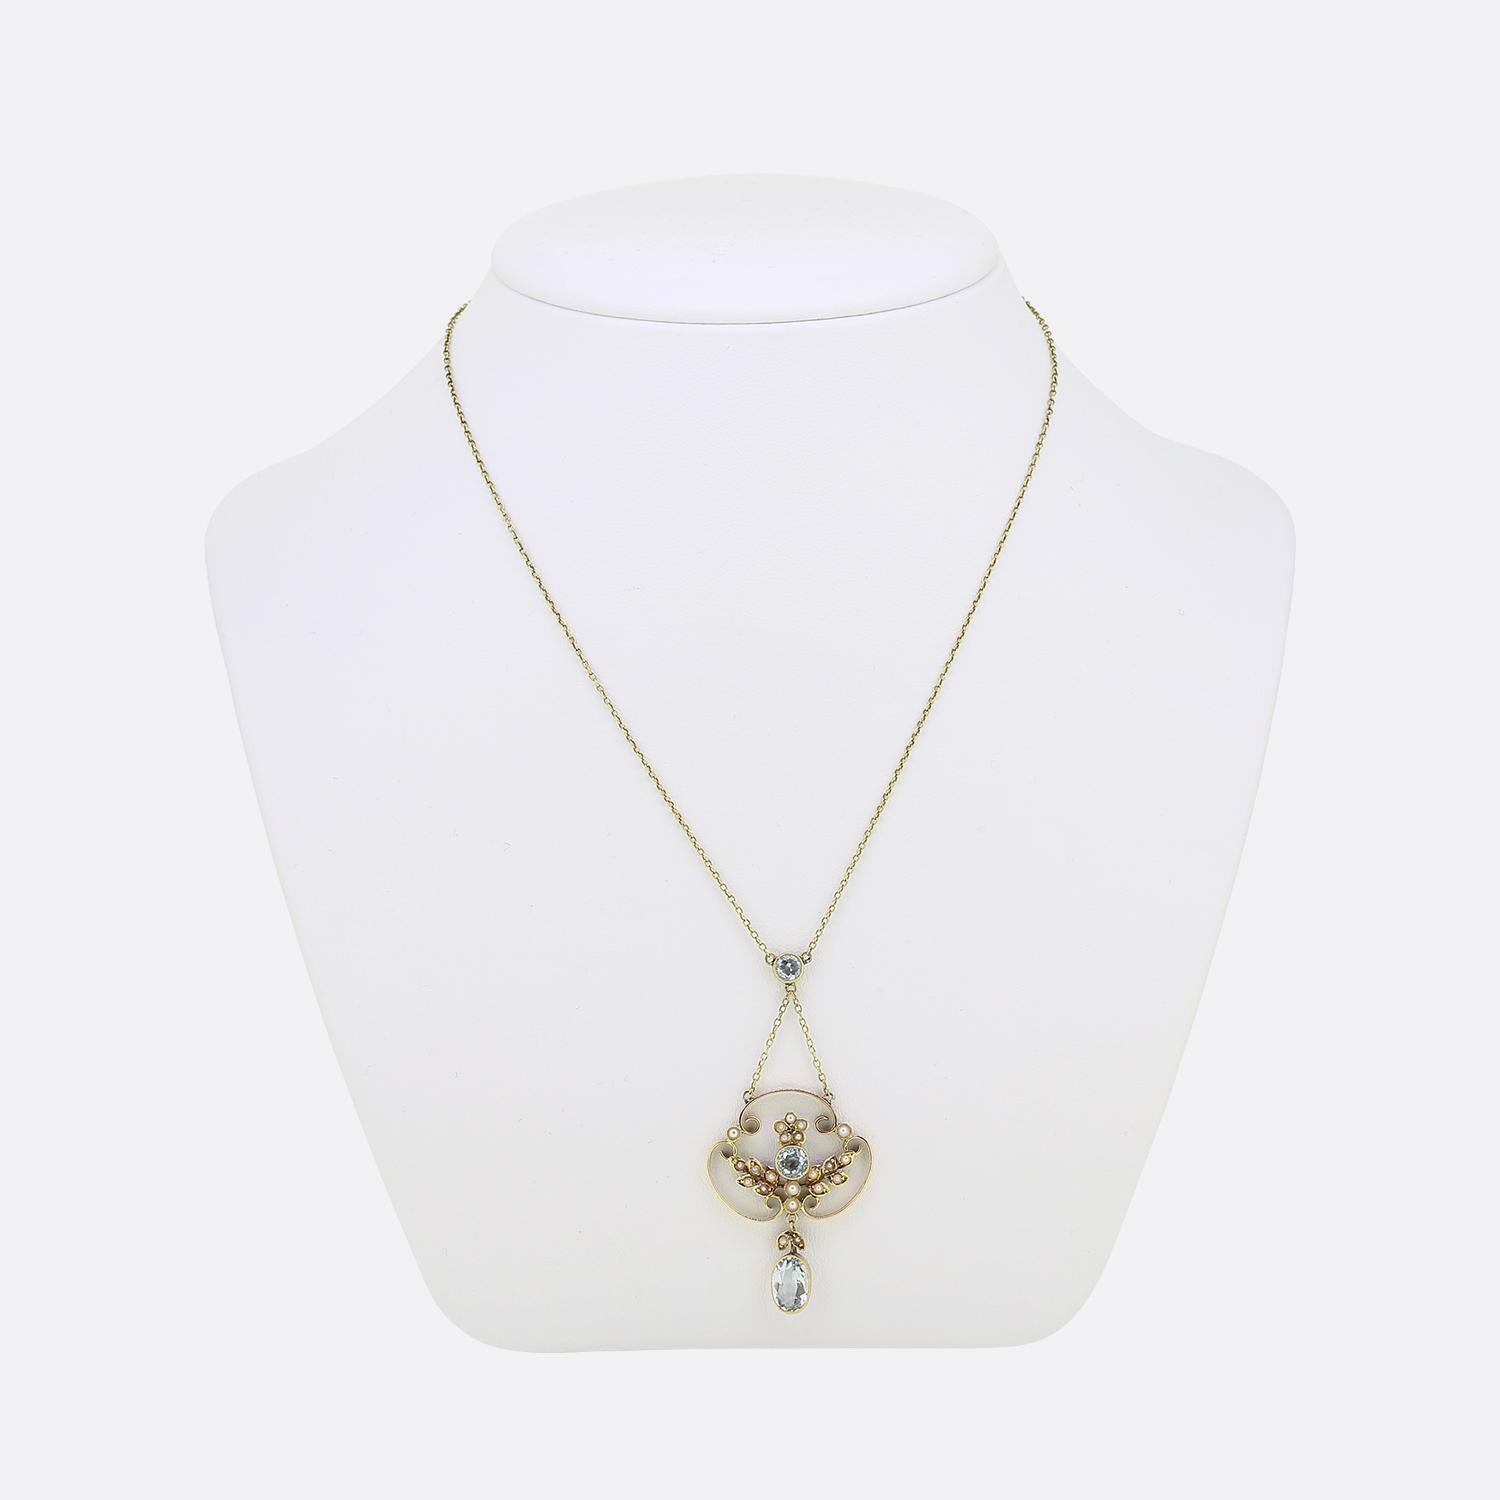 Here we have a charming lavalier necklace dating back to the Victorian era. An open 15ct yellow gold frame is centrally set with a round faceted aquamarine which is surrounded by a fabulous foliated design filled with tiny seed pearls. An oval